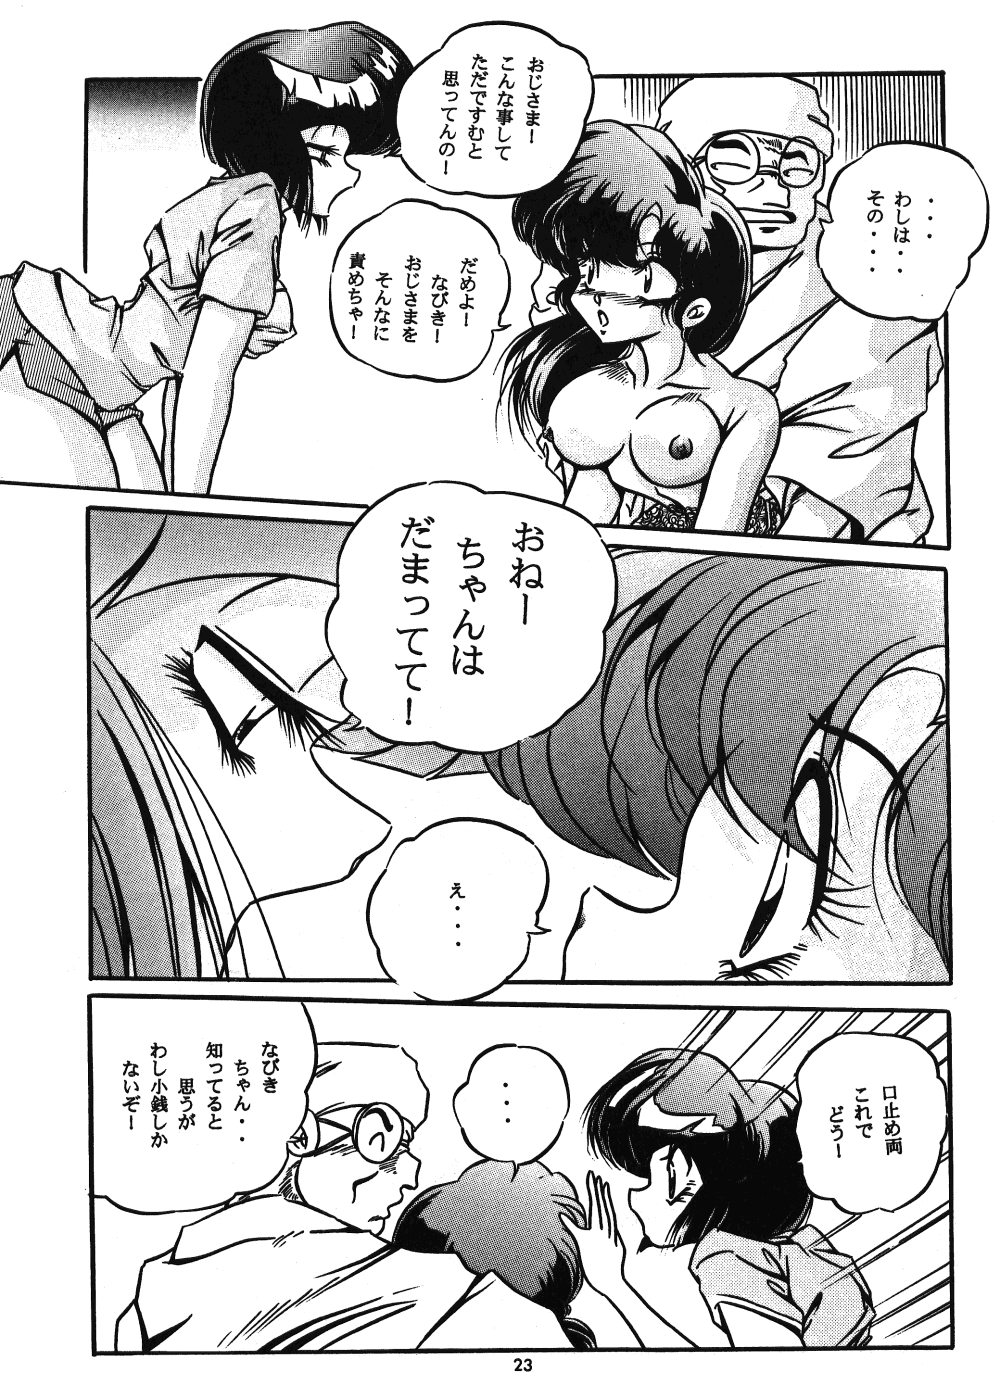 [C-COMPANY] C-COMPANY SPECIAL STAGE 18 (Ranma 1/2, Idol Project) page 24 full